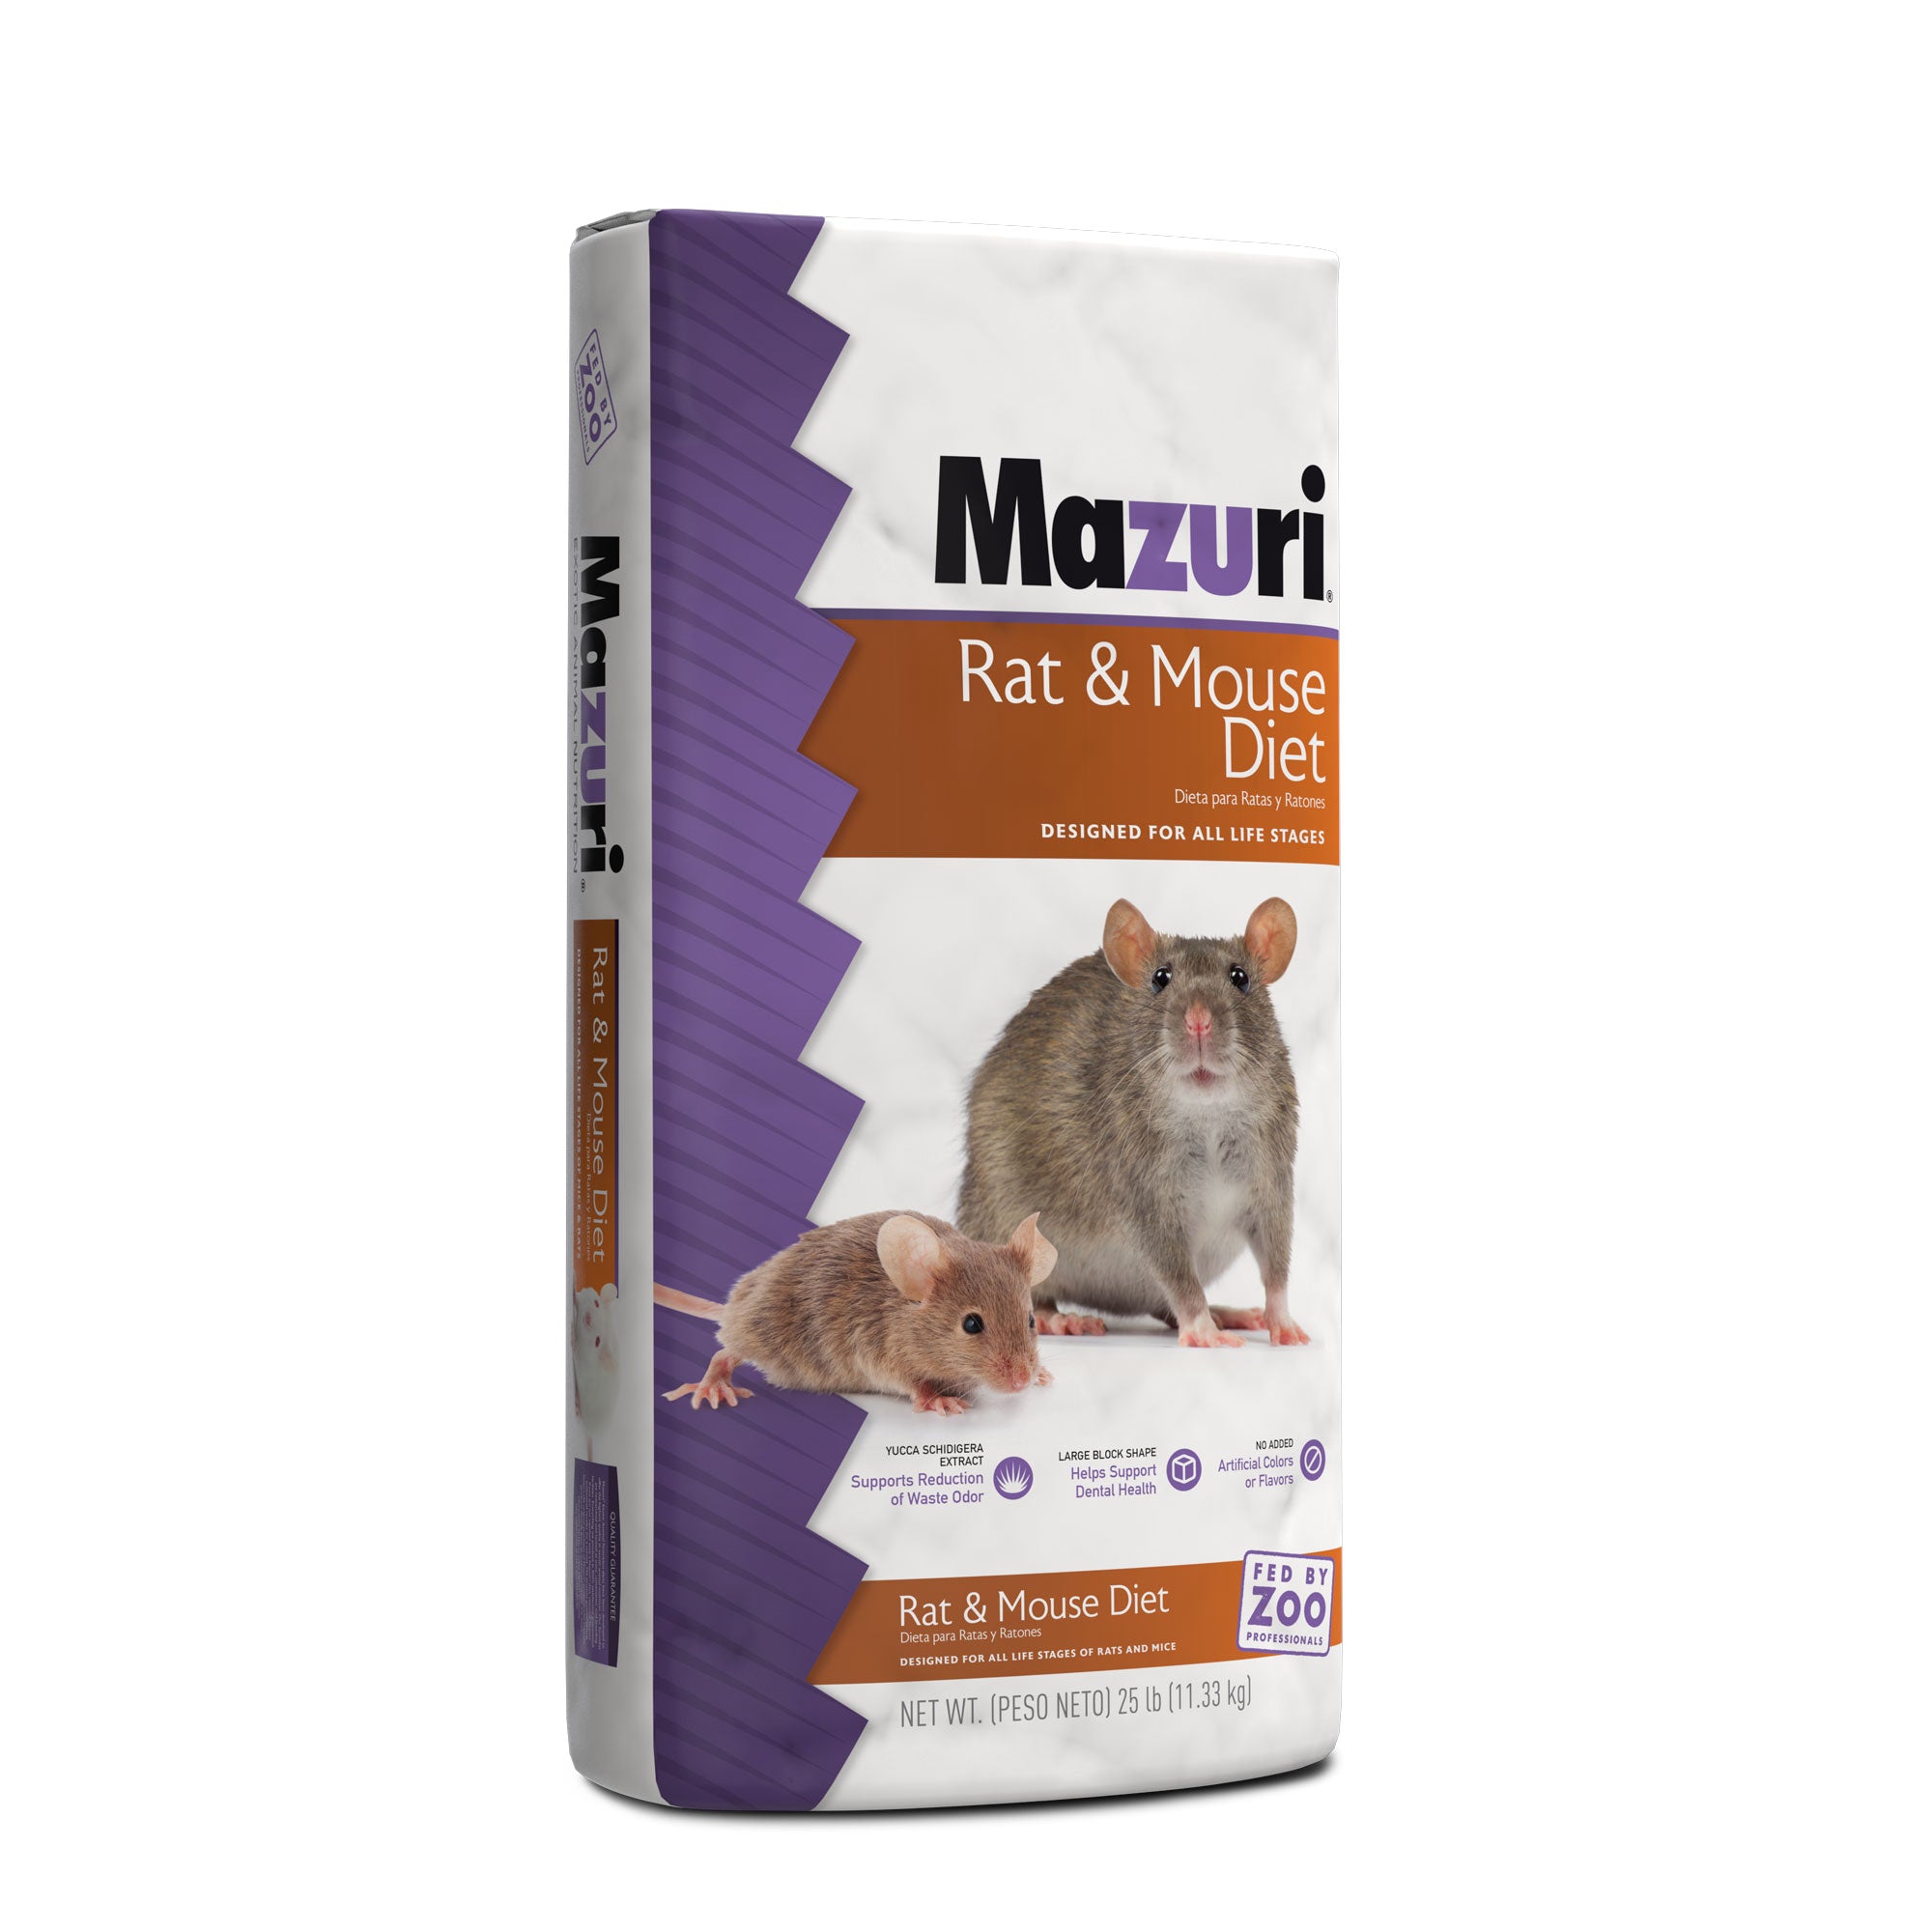 Rat & Mouse Diet 25 pound bag front and gusset